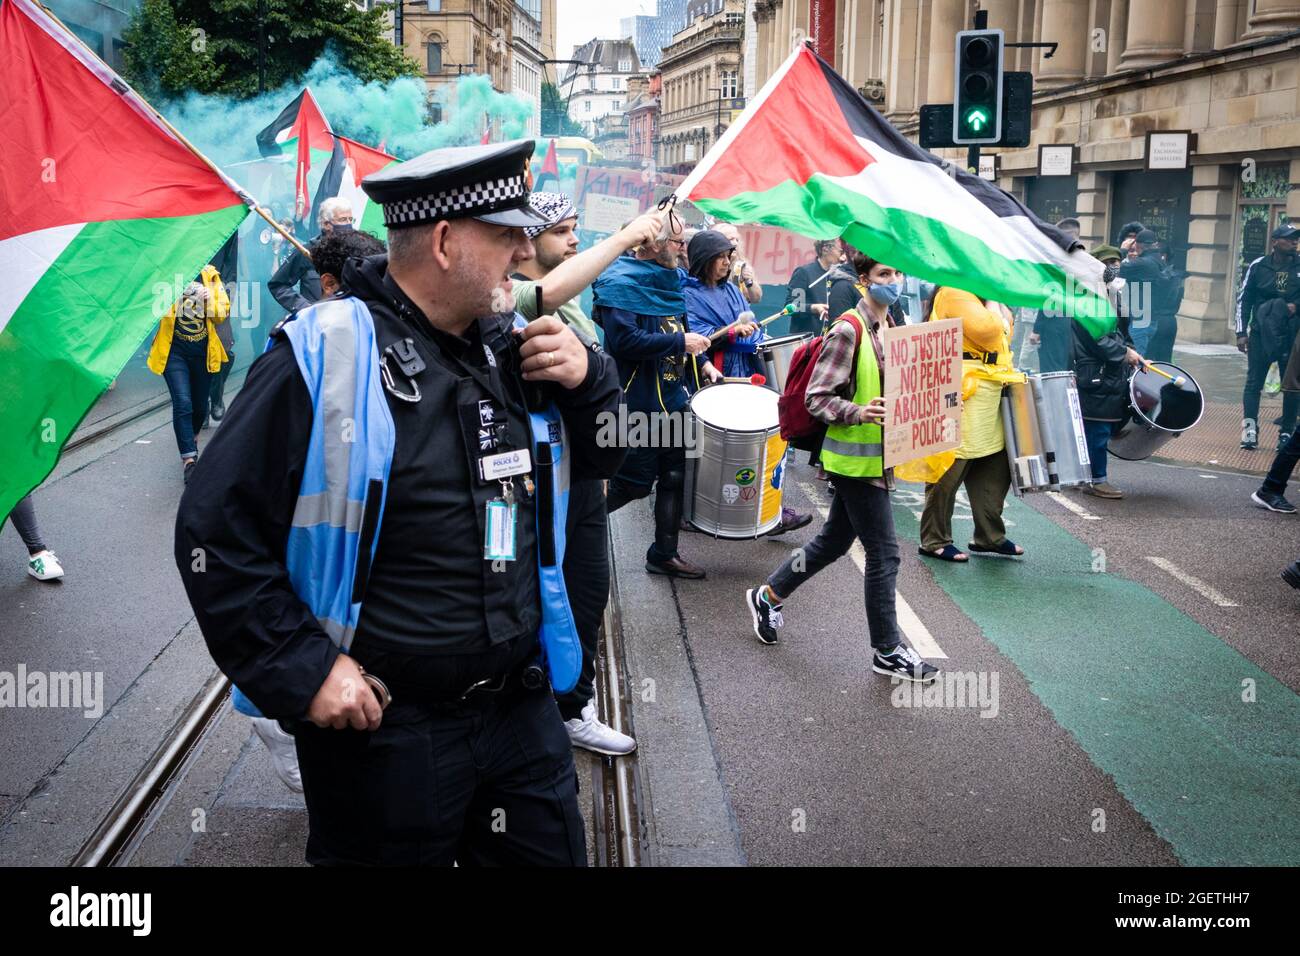 Manchester, UK. 21st Aug, 2021. A police liaison officer walks next to the Kill The Bill march. Protests across the country have been organised due to the proposed Police, Crime and Sentencing Bill that, if passed, would introduce new legislation around demonstrations. Credit: Andy Barton/Alamy Live News Stock Photo